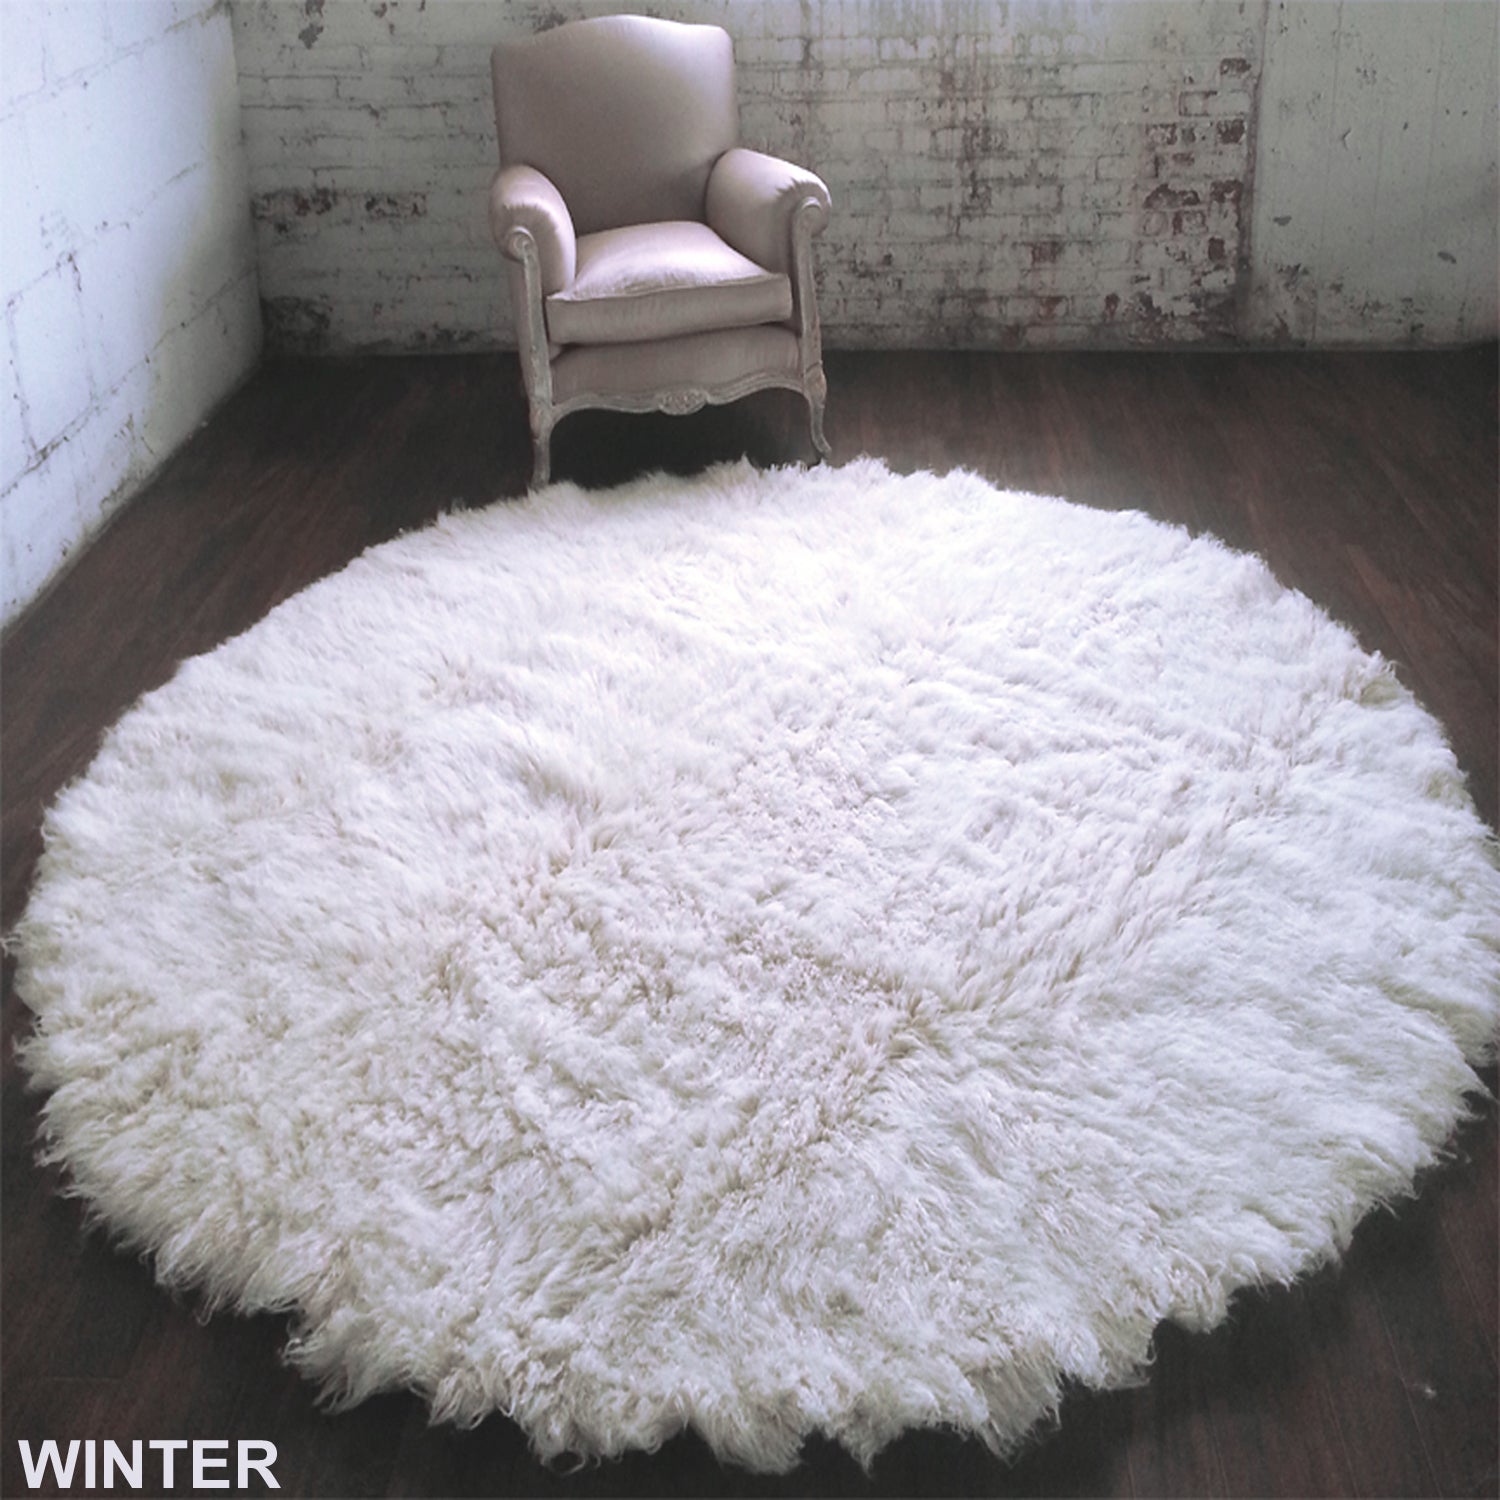 DELUXE ROUND FLOKATI RUG | SUPER THICK 3.5